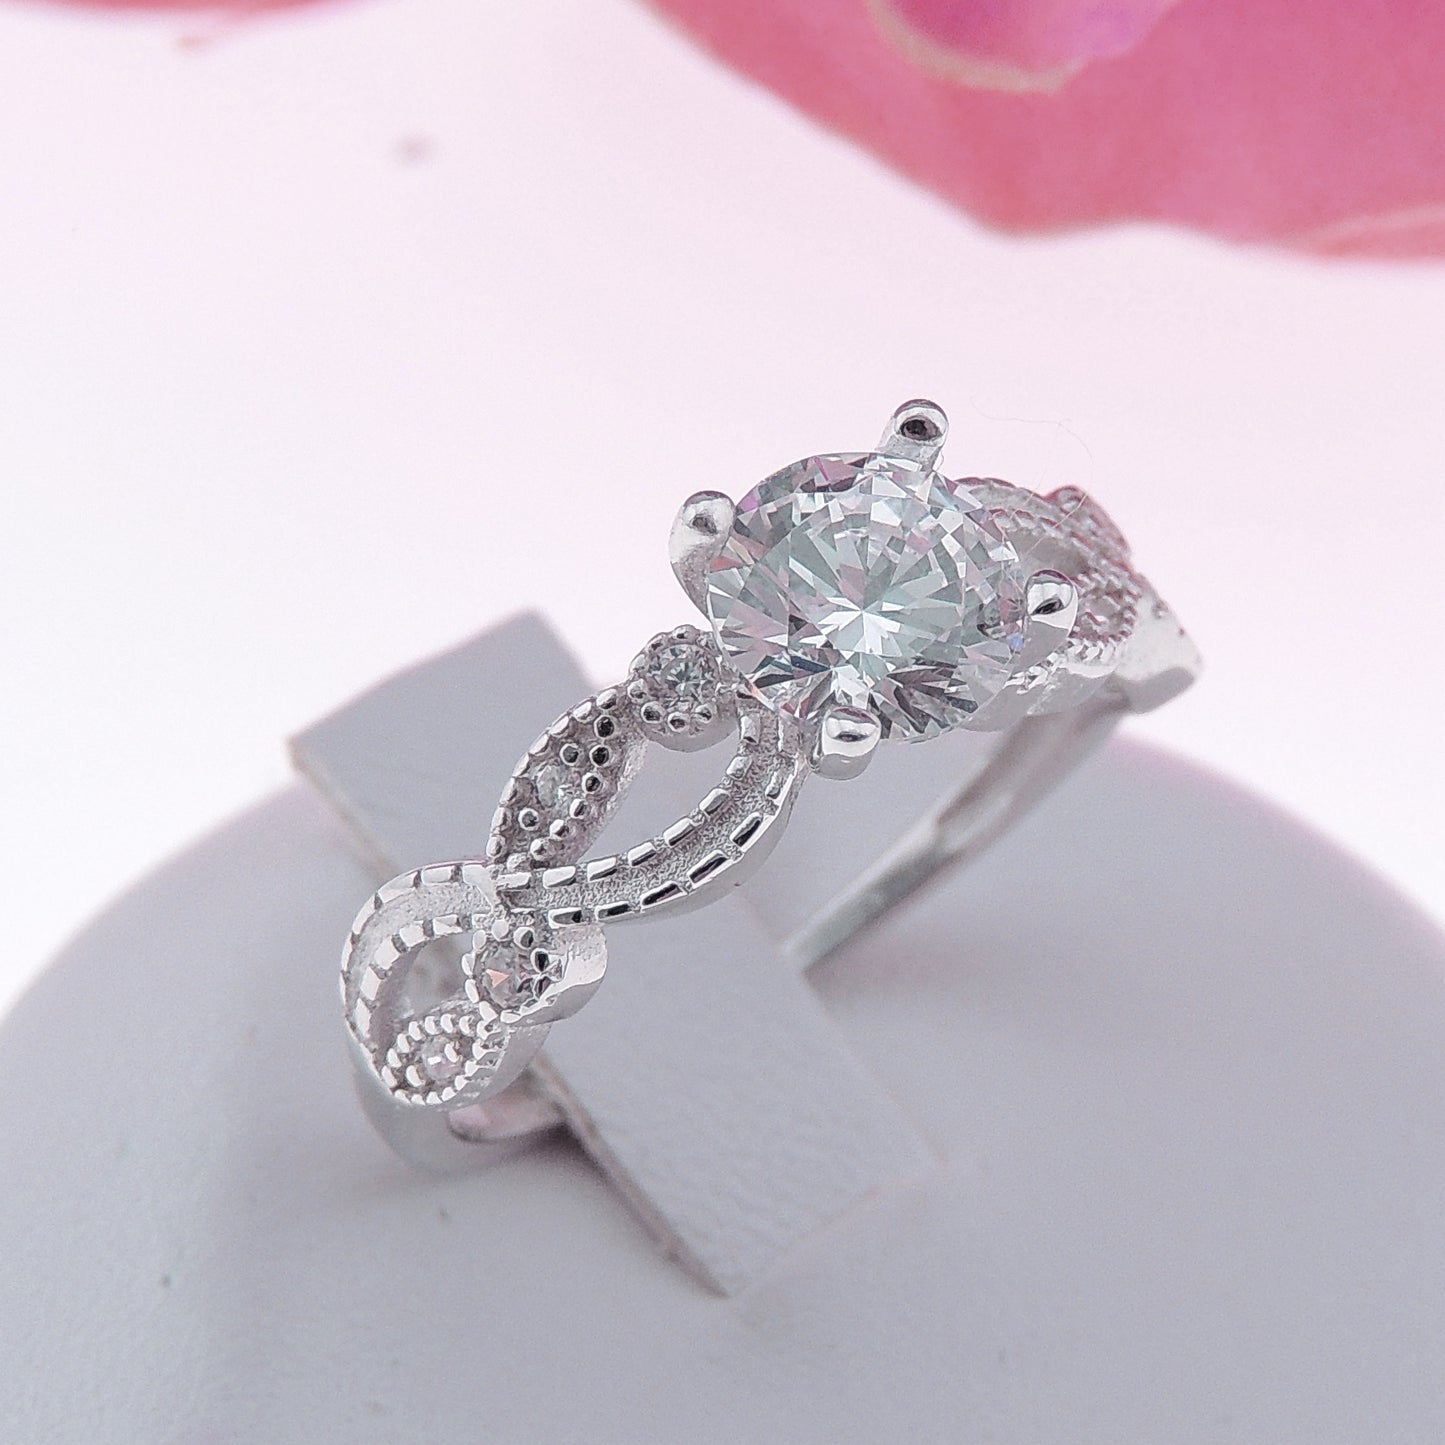 Engagement Ring Sterling Silver Cz Versia Filigree Womens Ginger Lyne Collection - 10